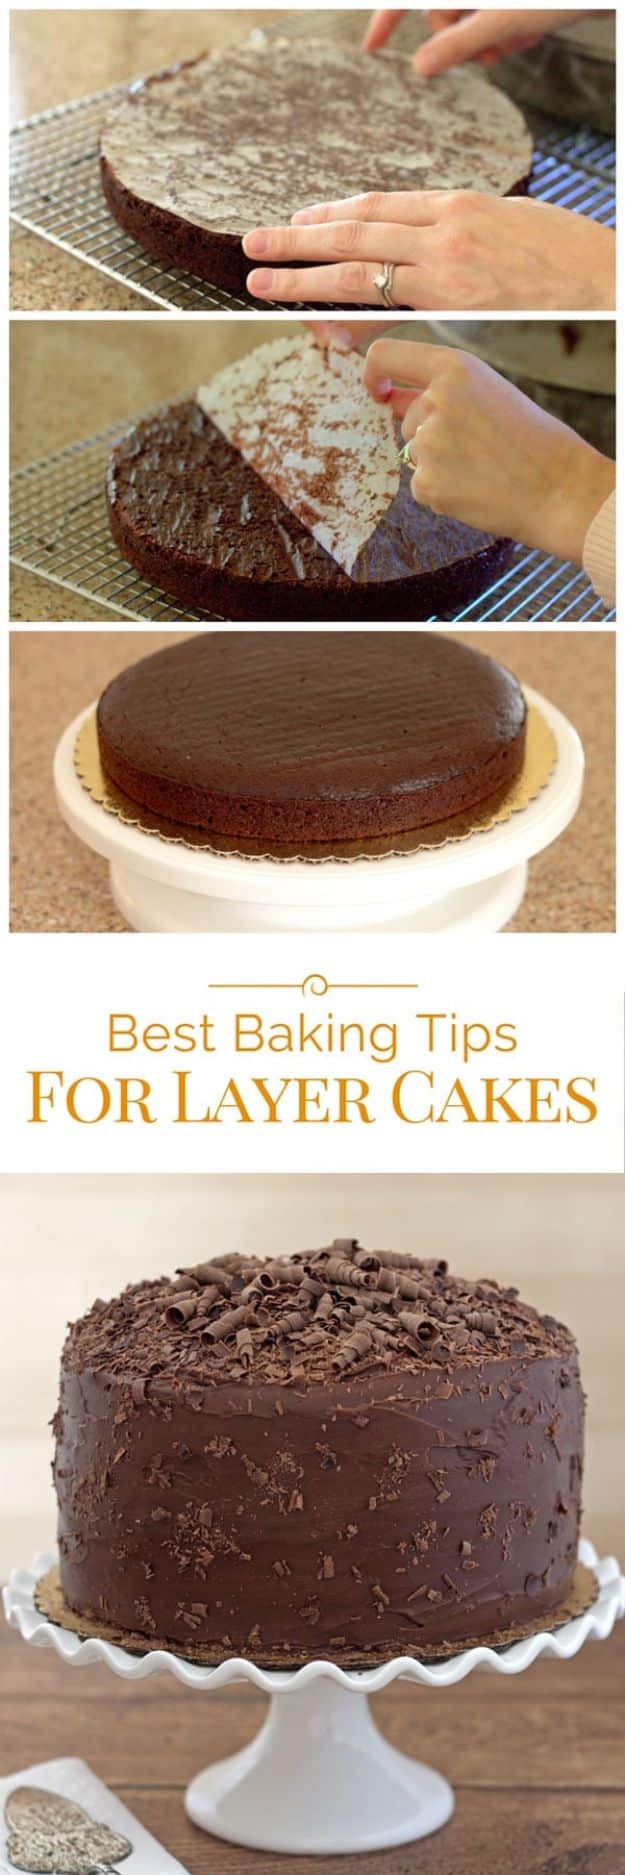 Baking Hacks - Baking Tip For Layer Cakes - A List of Easy Hacks For Your Favorite Baking Recipes - Simple Tips and Tricks To Use When You Bake - Quick Ways to Bake Cake, Cupcakes, Desserts and Cookies - Best Kitchen Lifehacks for Bakers Favorite DIY Recipe 